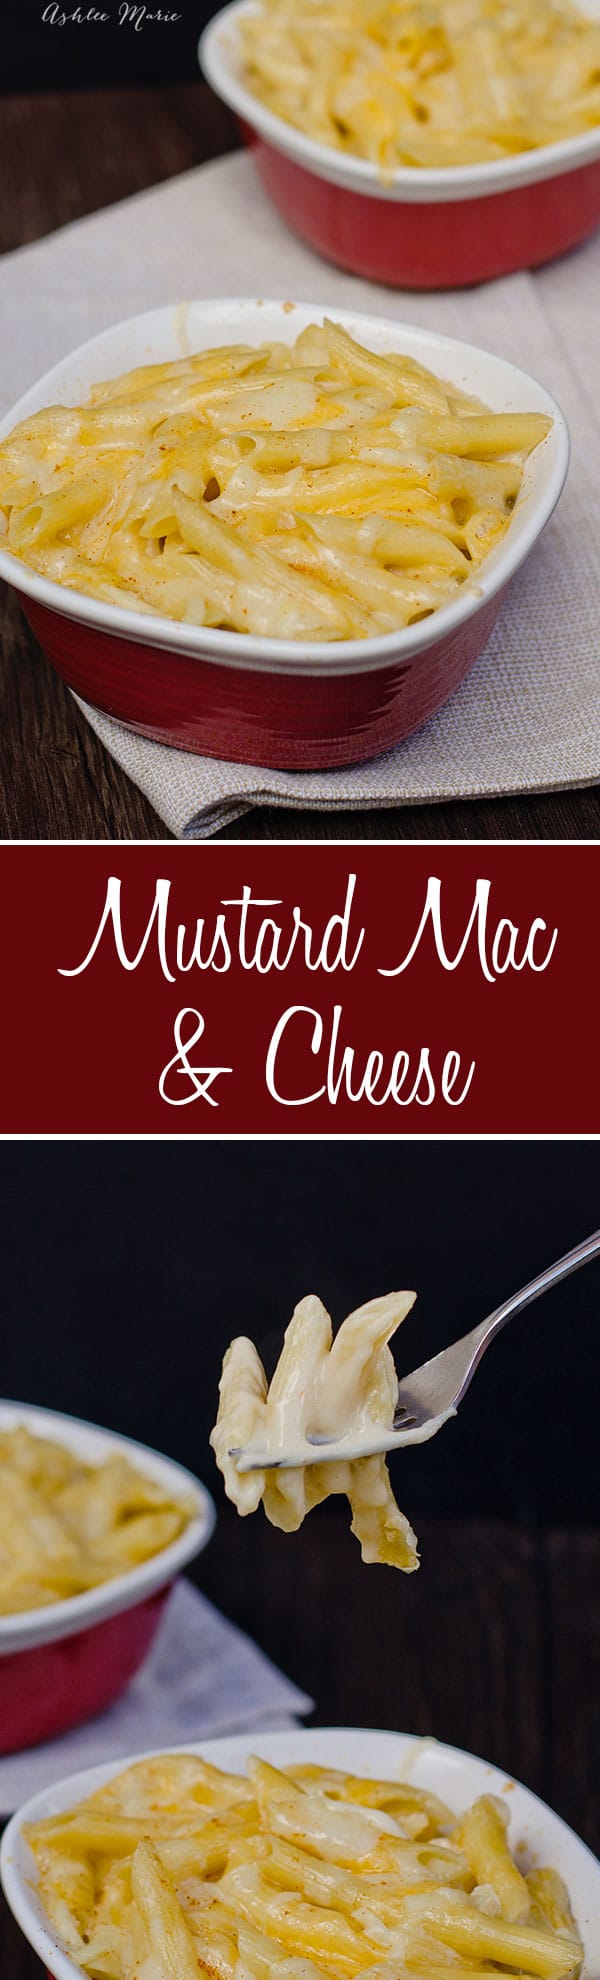 a creamy mac and cheese recipe with 3 different cheeses and a touch of mustard that brings out a wonderful flavor, my kids actually love this more than the boxed mac and cheese dinners